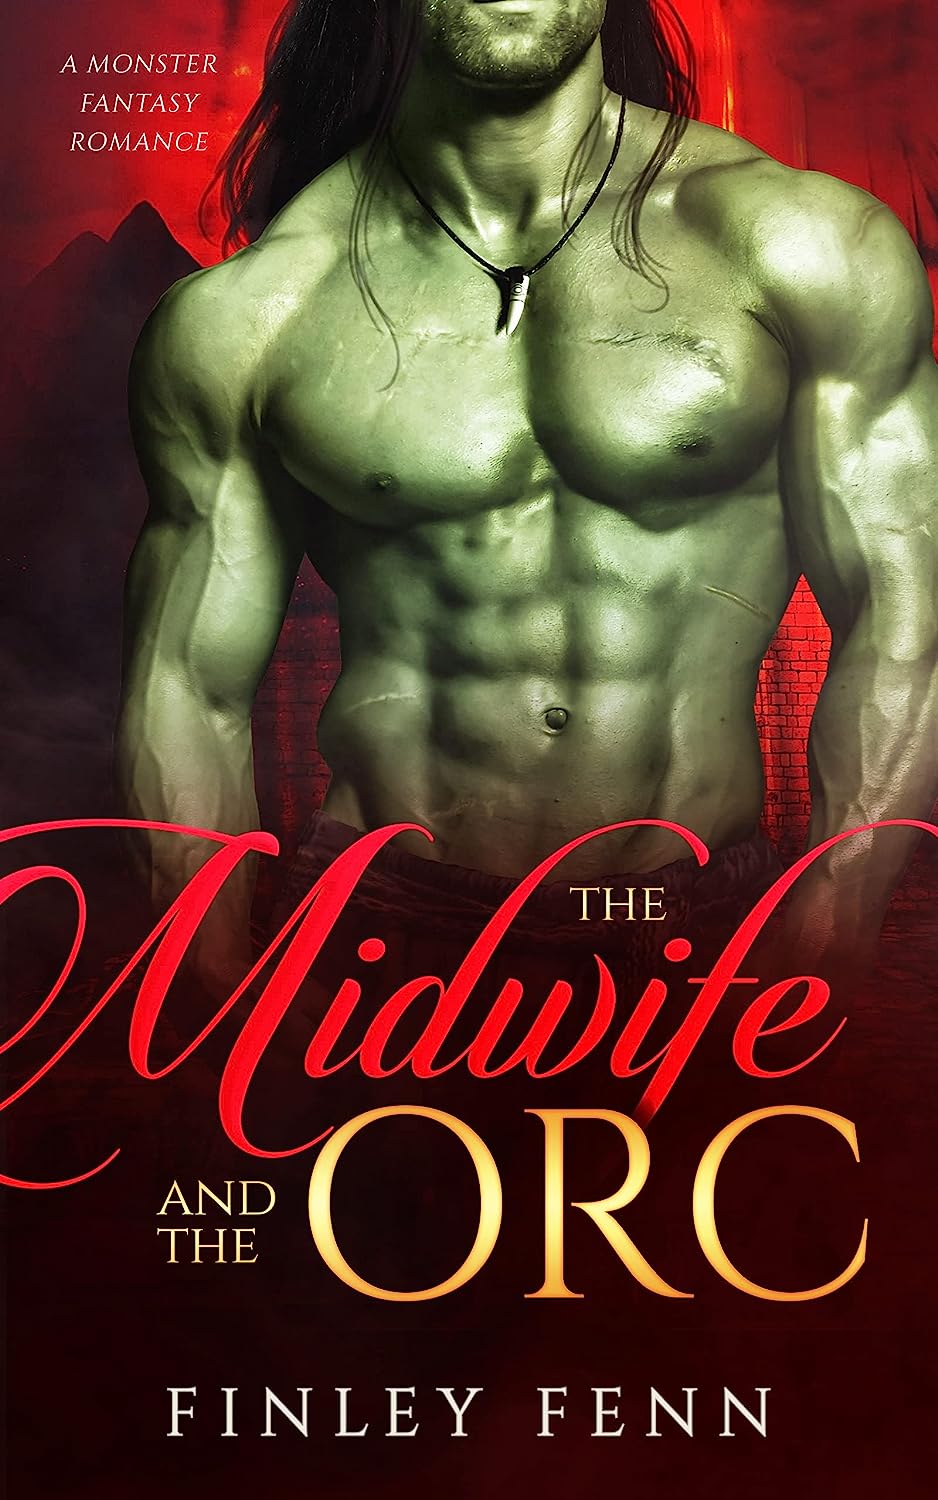 The Midwife and the Orc by Finley Fenn